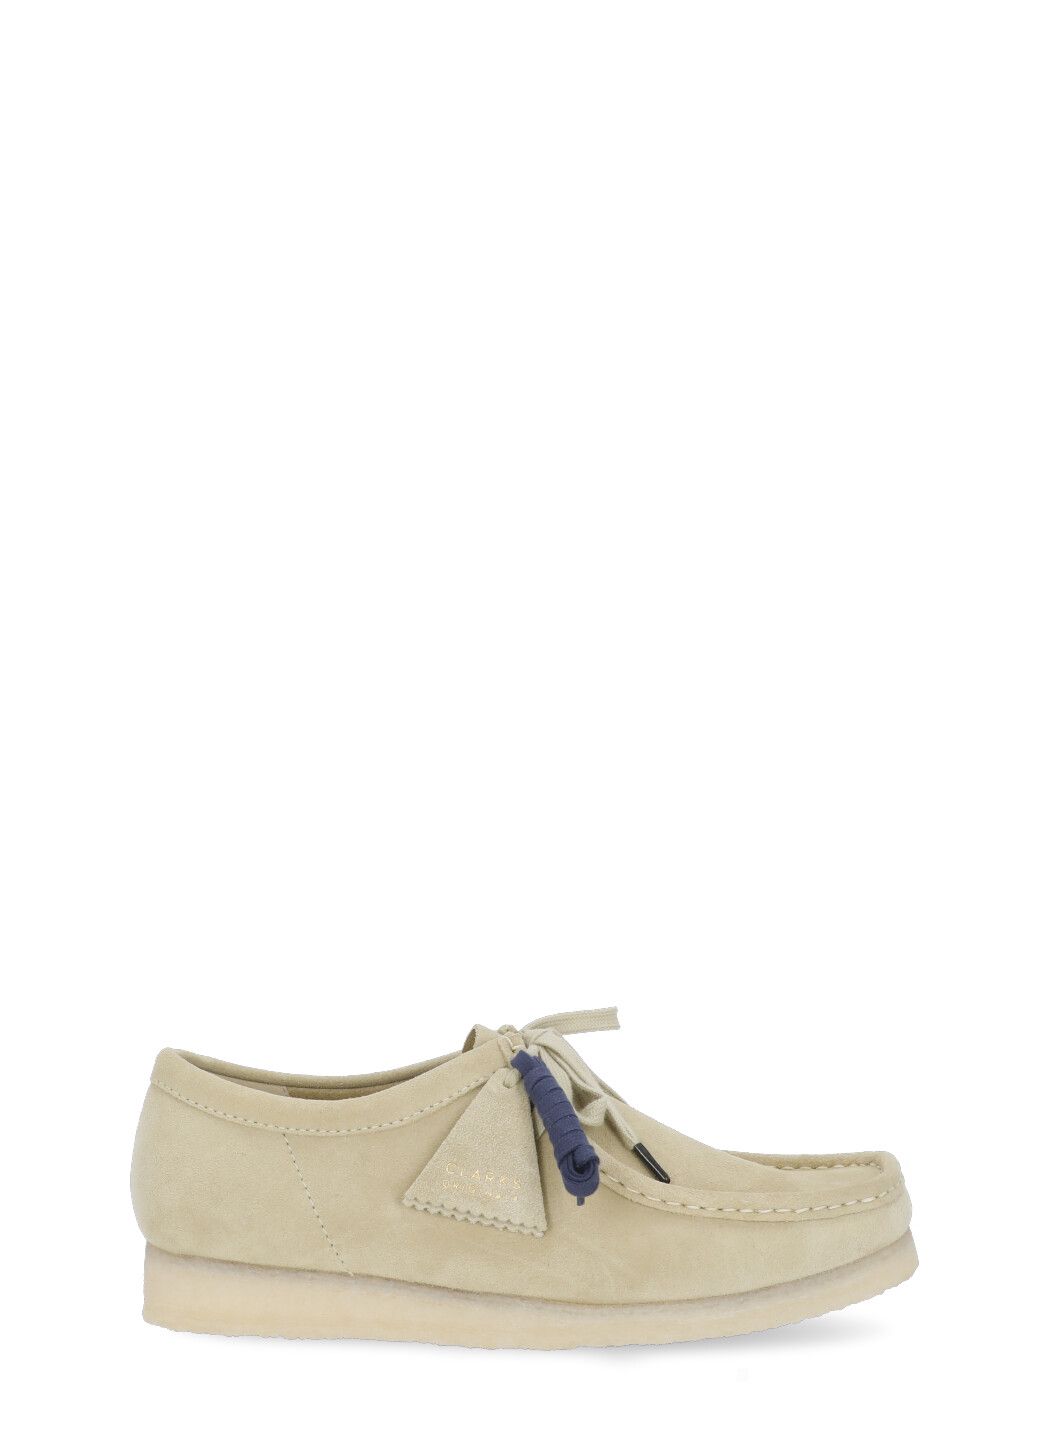 Wallabee low shoes